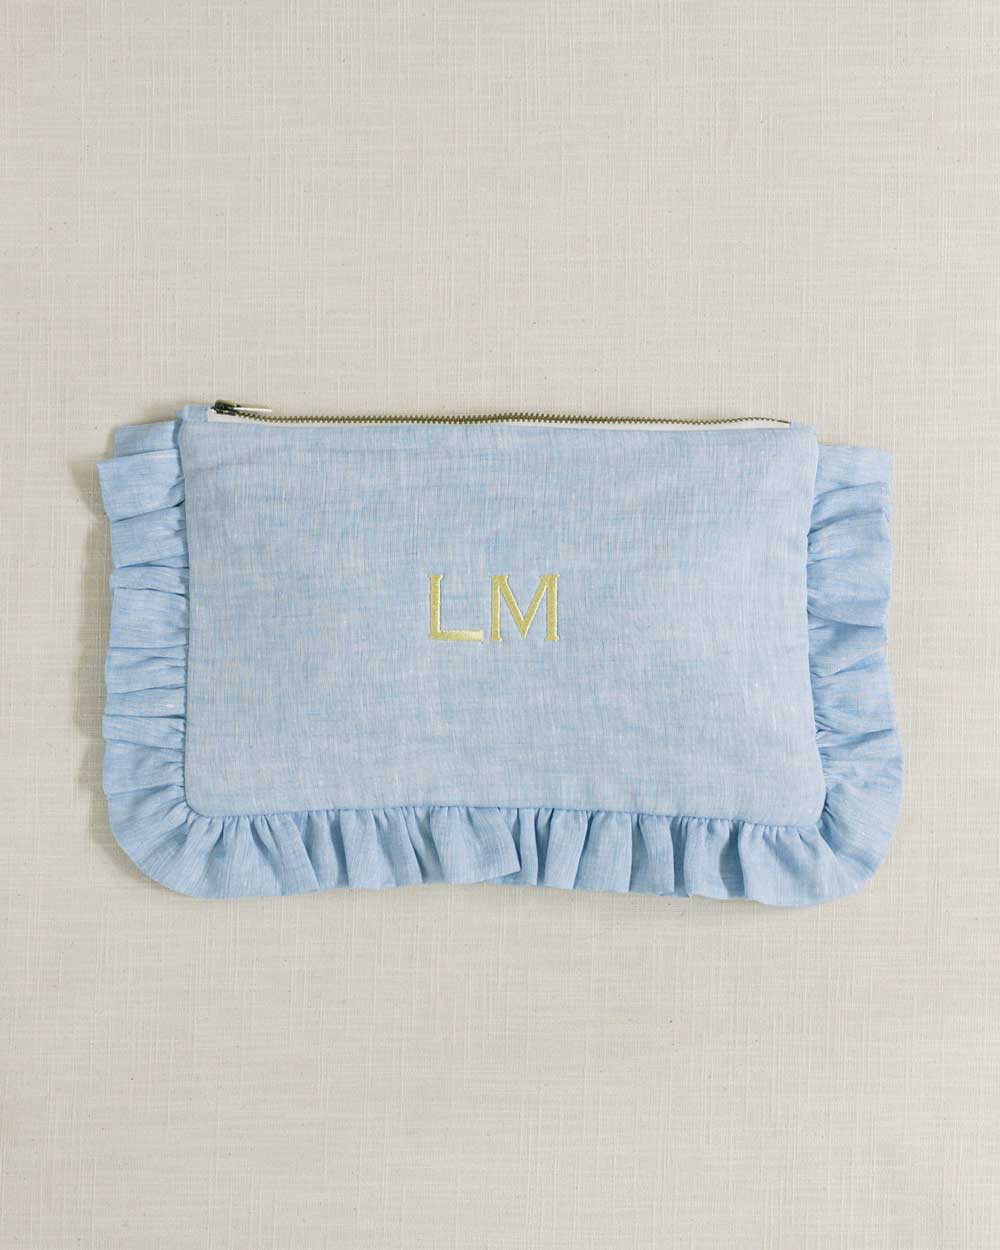 The Chambray Linen Ruffled Pouch